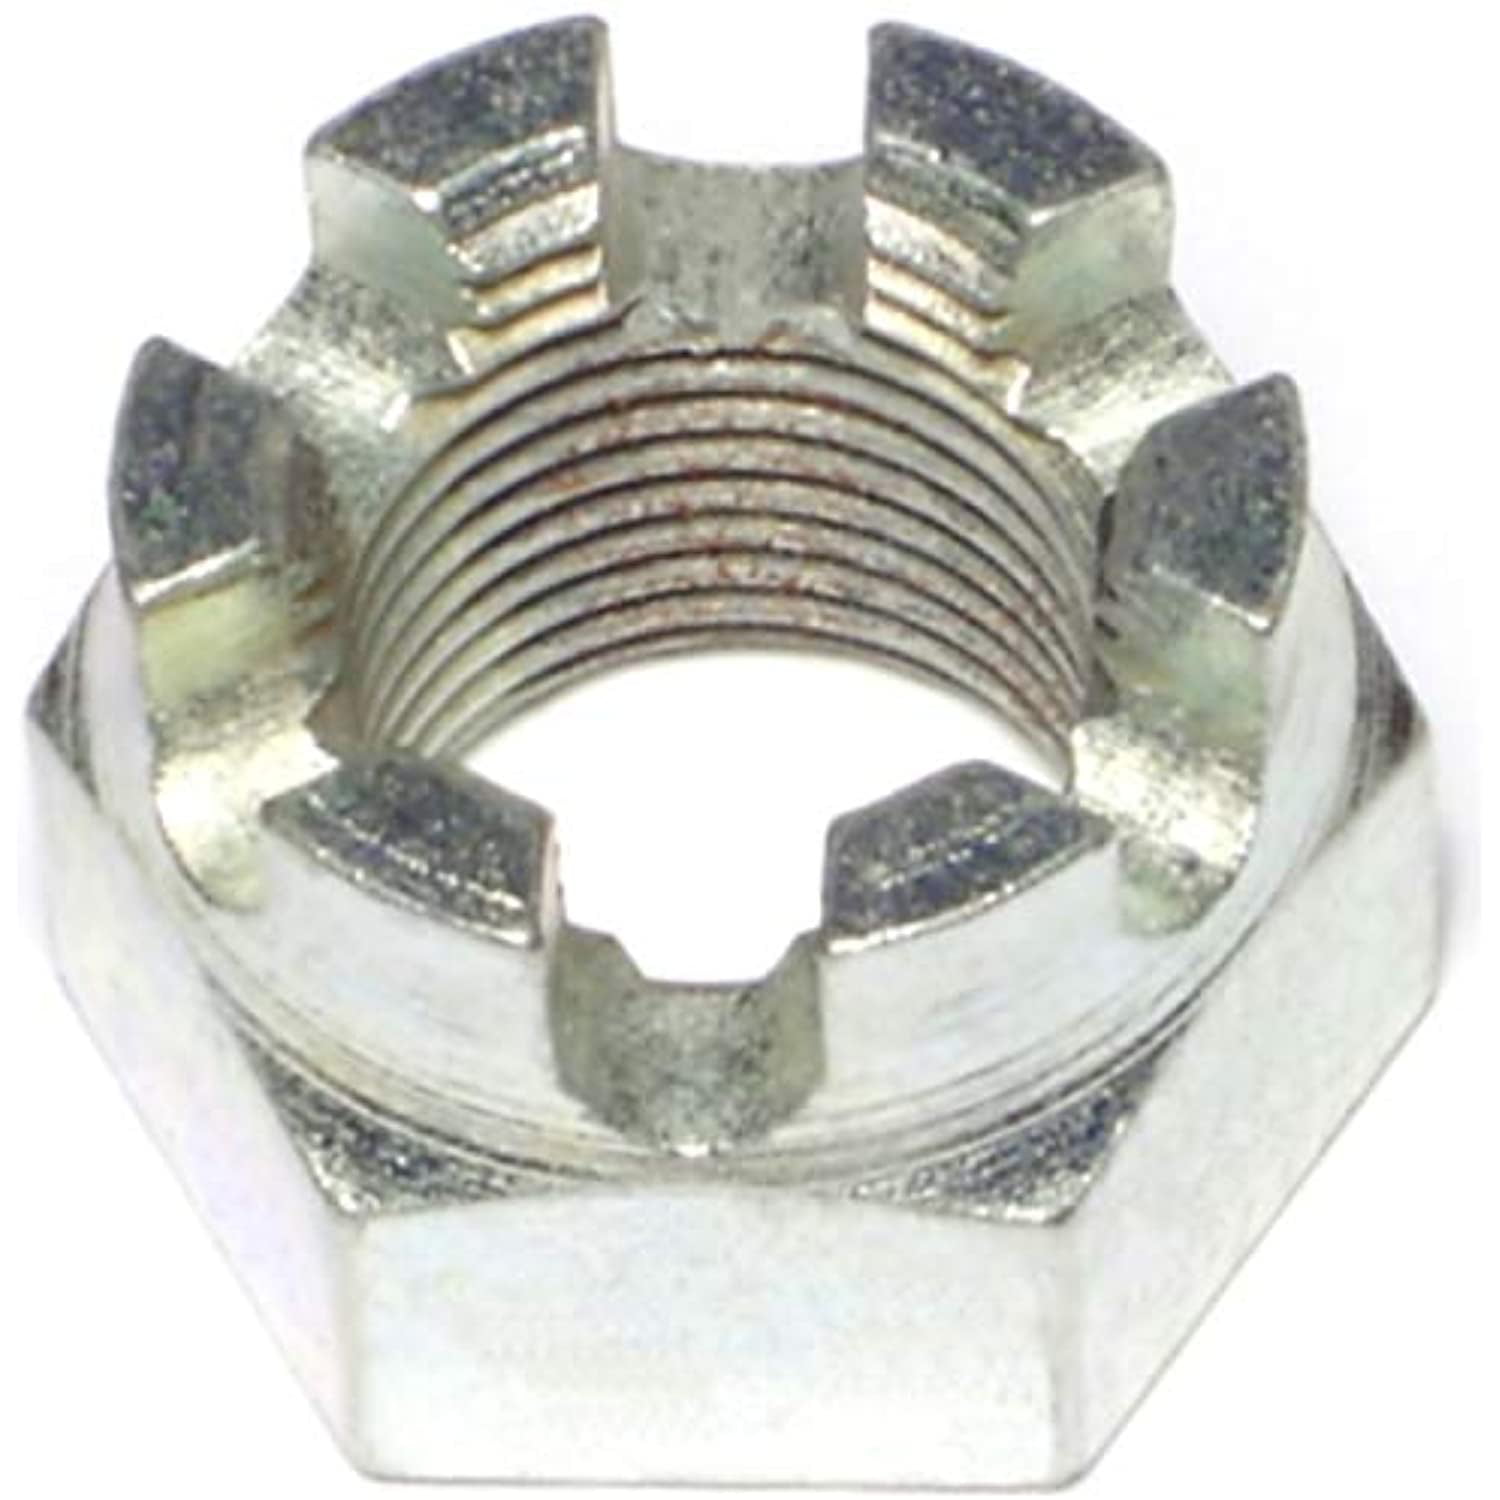 1 9/16-18 Slotted Hex Castle Nut Zinc Plated 9/16 x 18 Fine Thread 